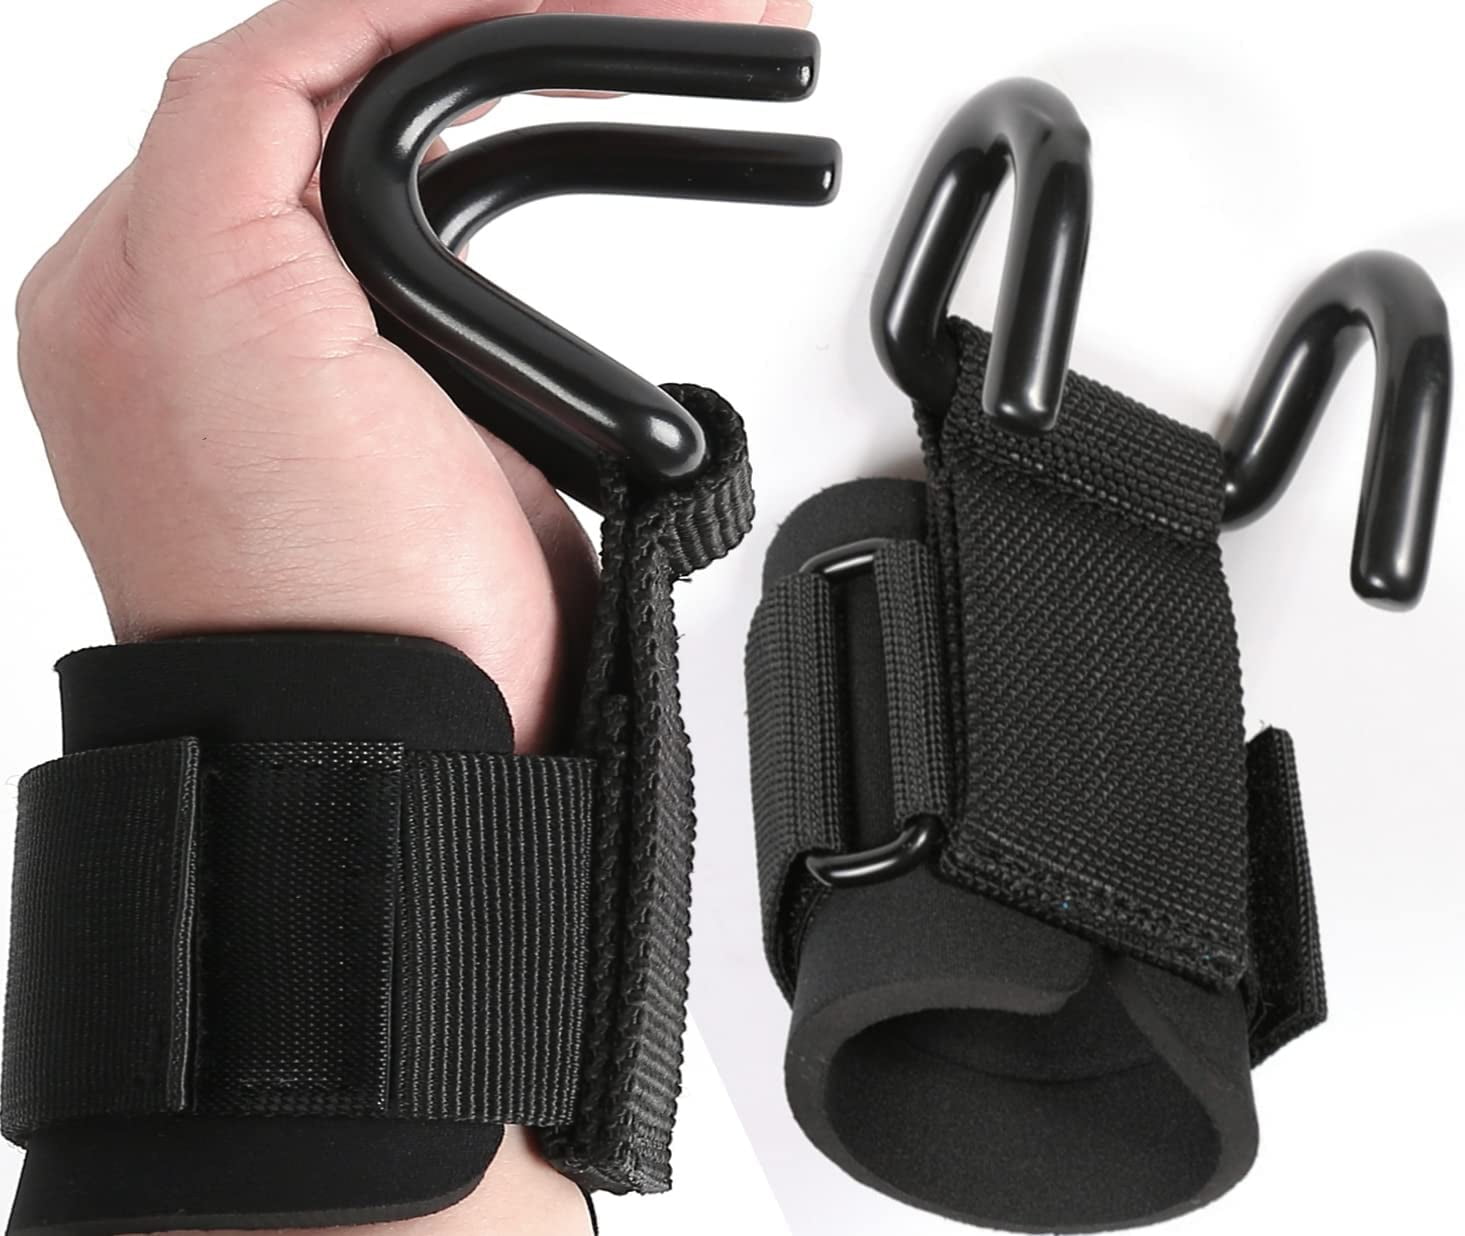 Weight Lifting Hooks and Deadlift Straps - Pull up Grips, Lifting